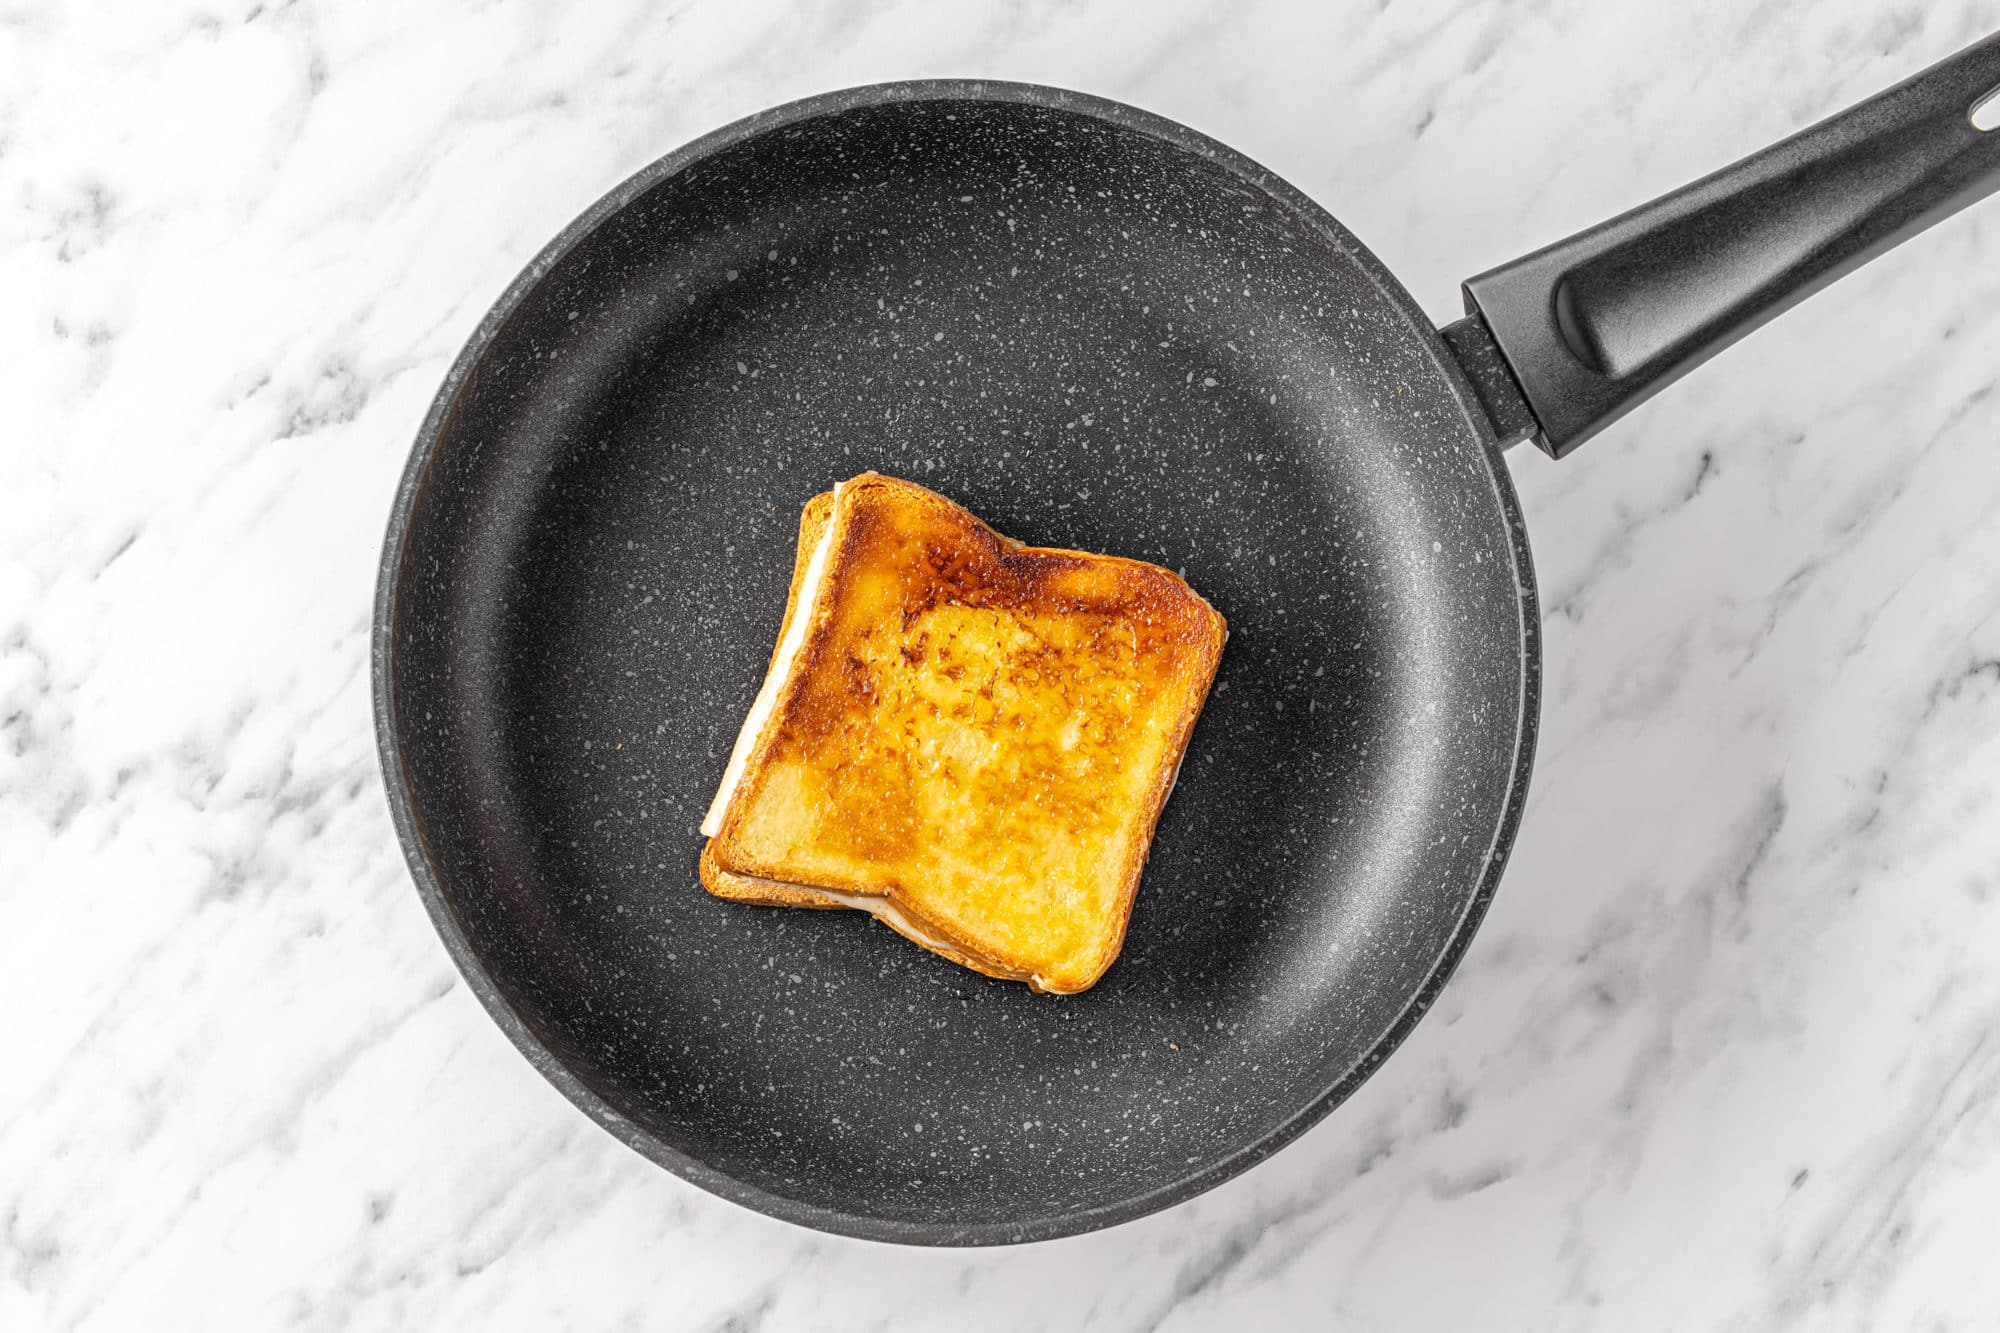 grilled cheese sandwich on a black skillet.